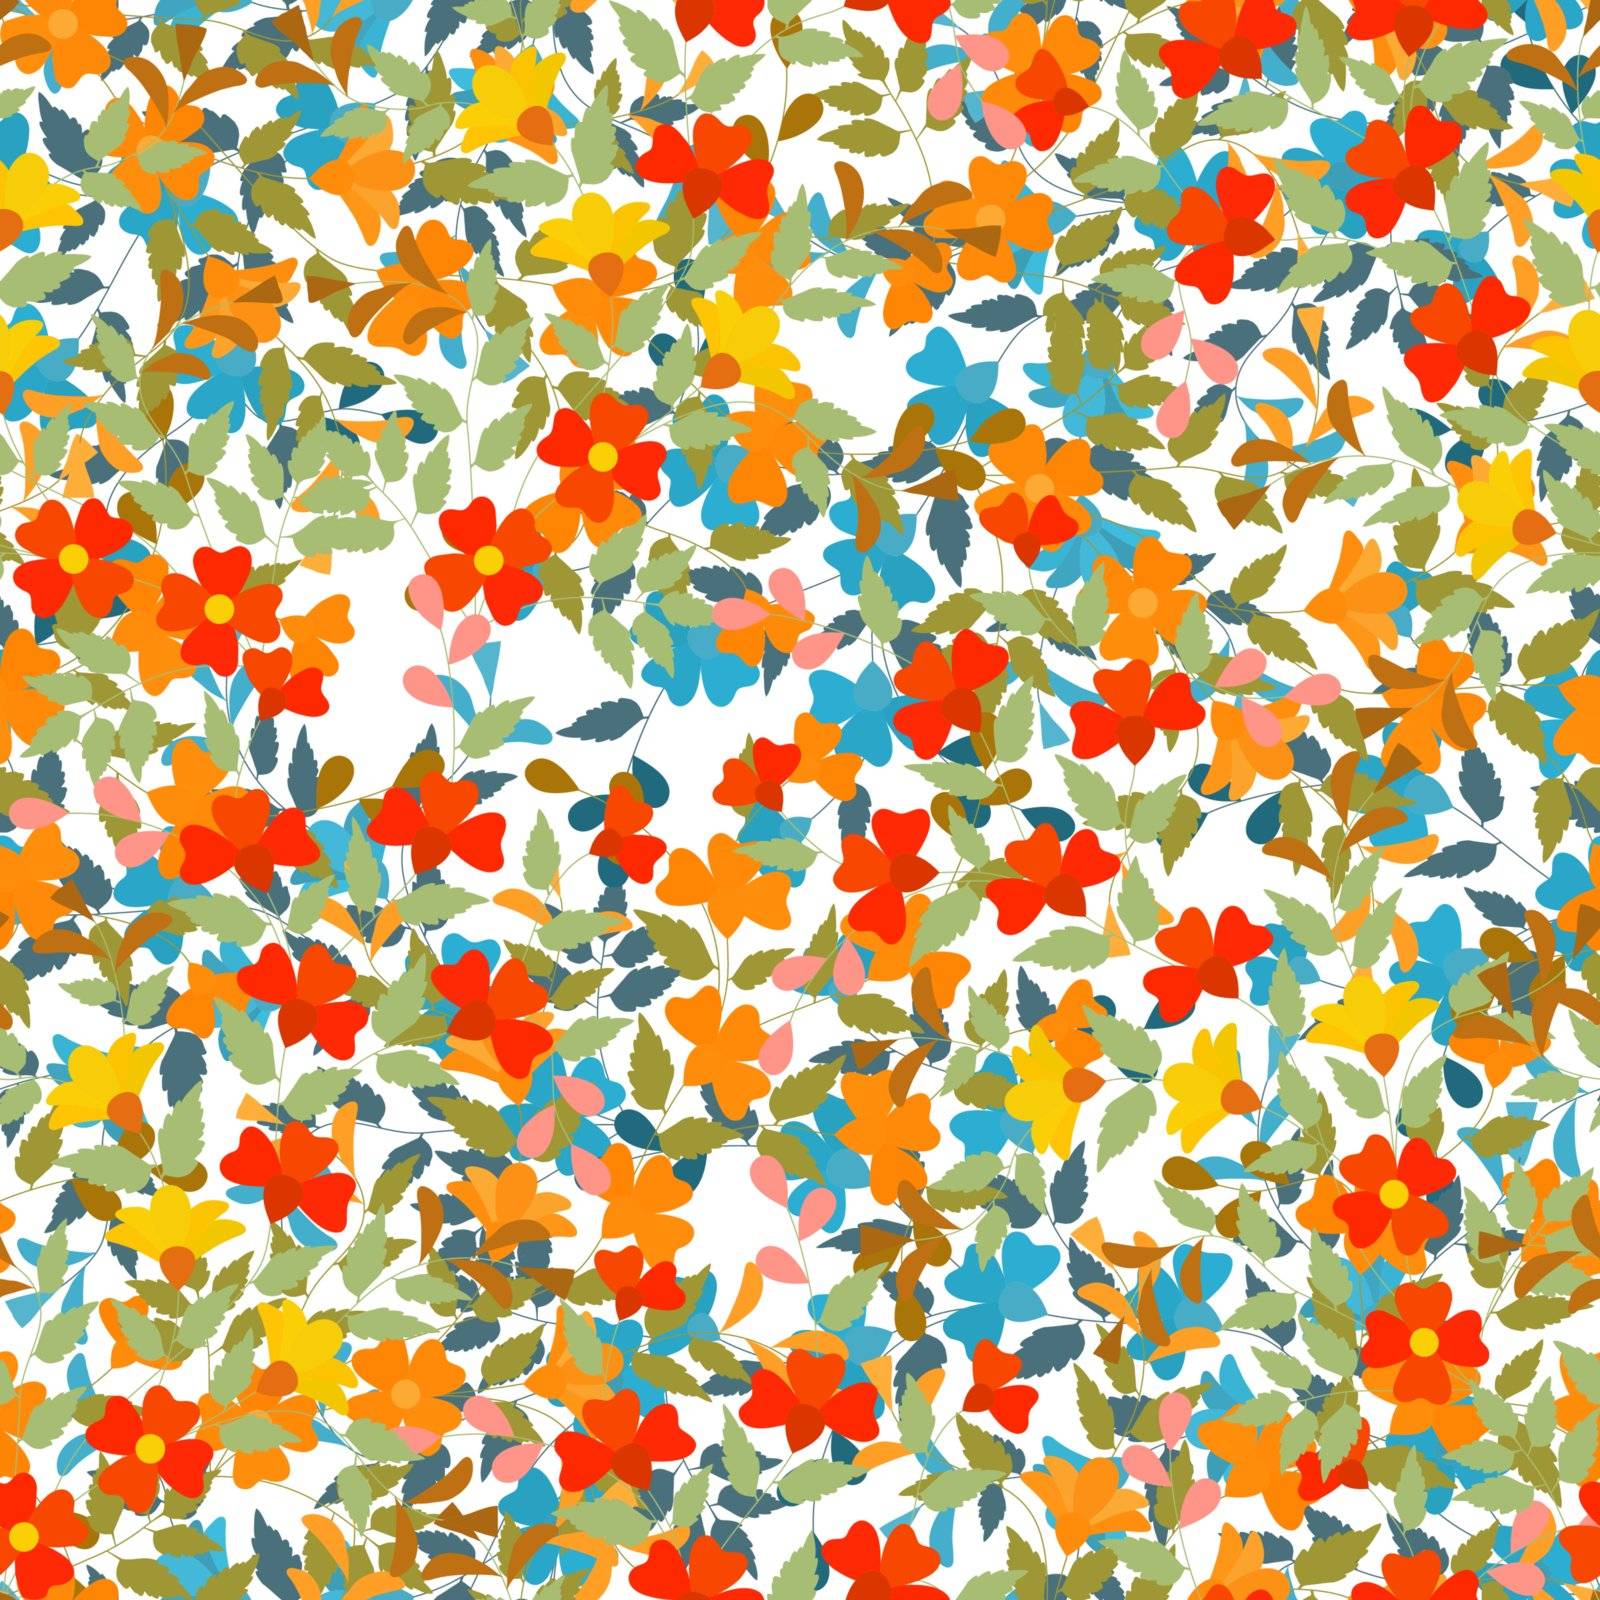 Floral tile by Tawng